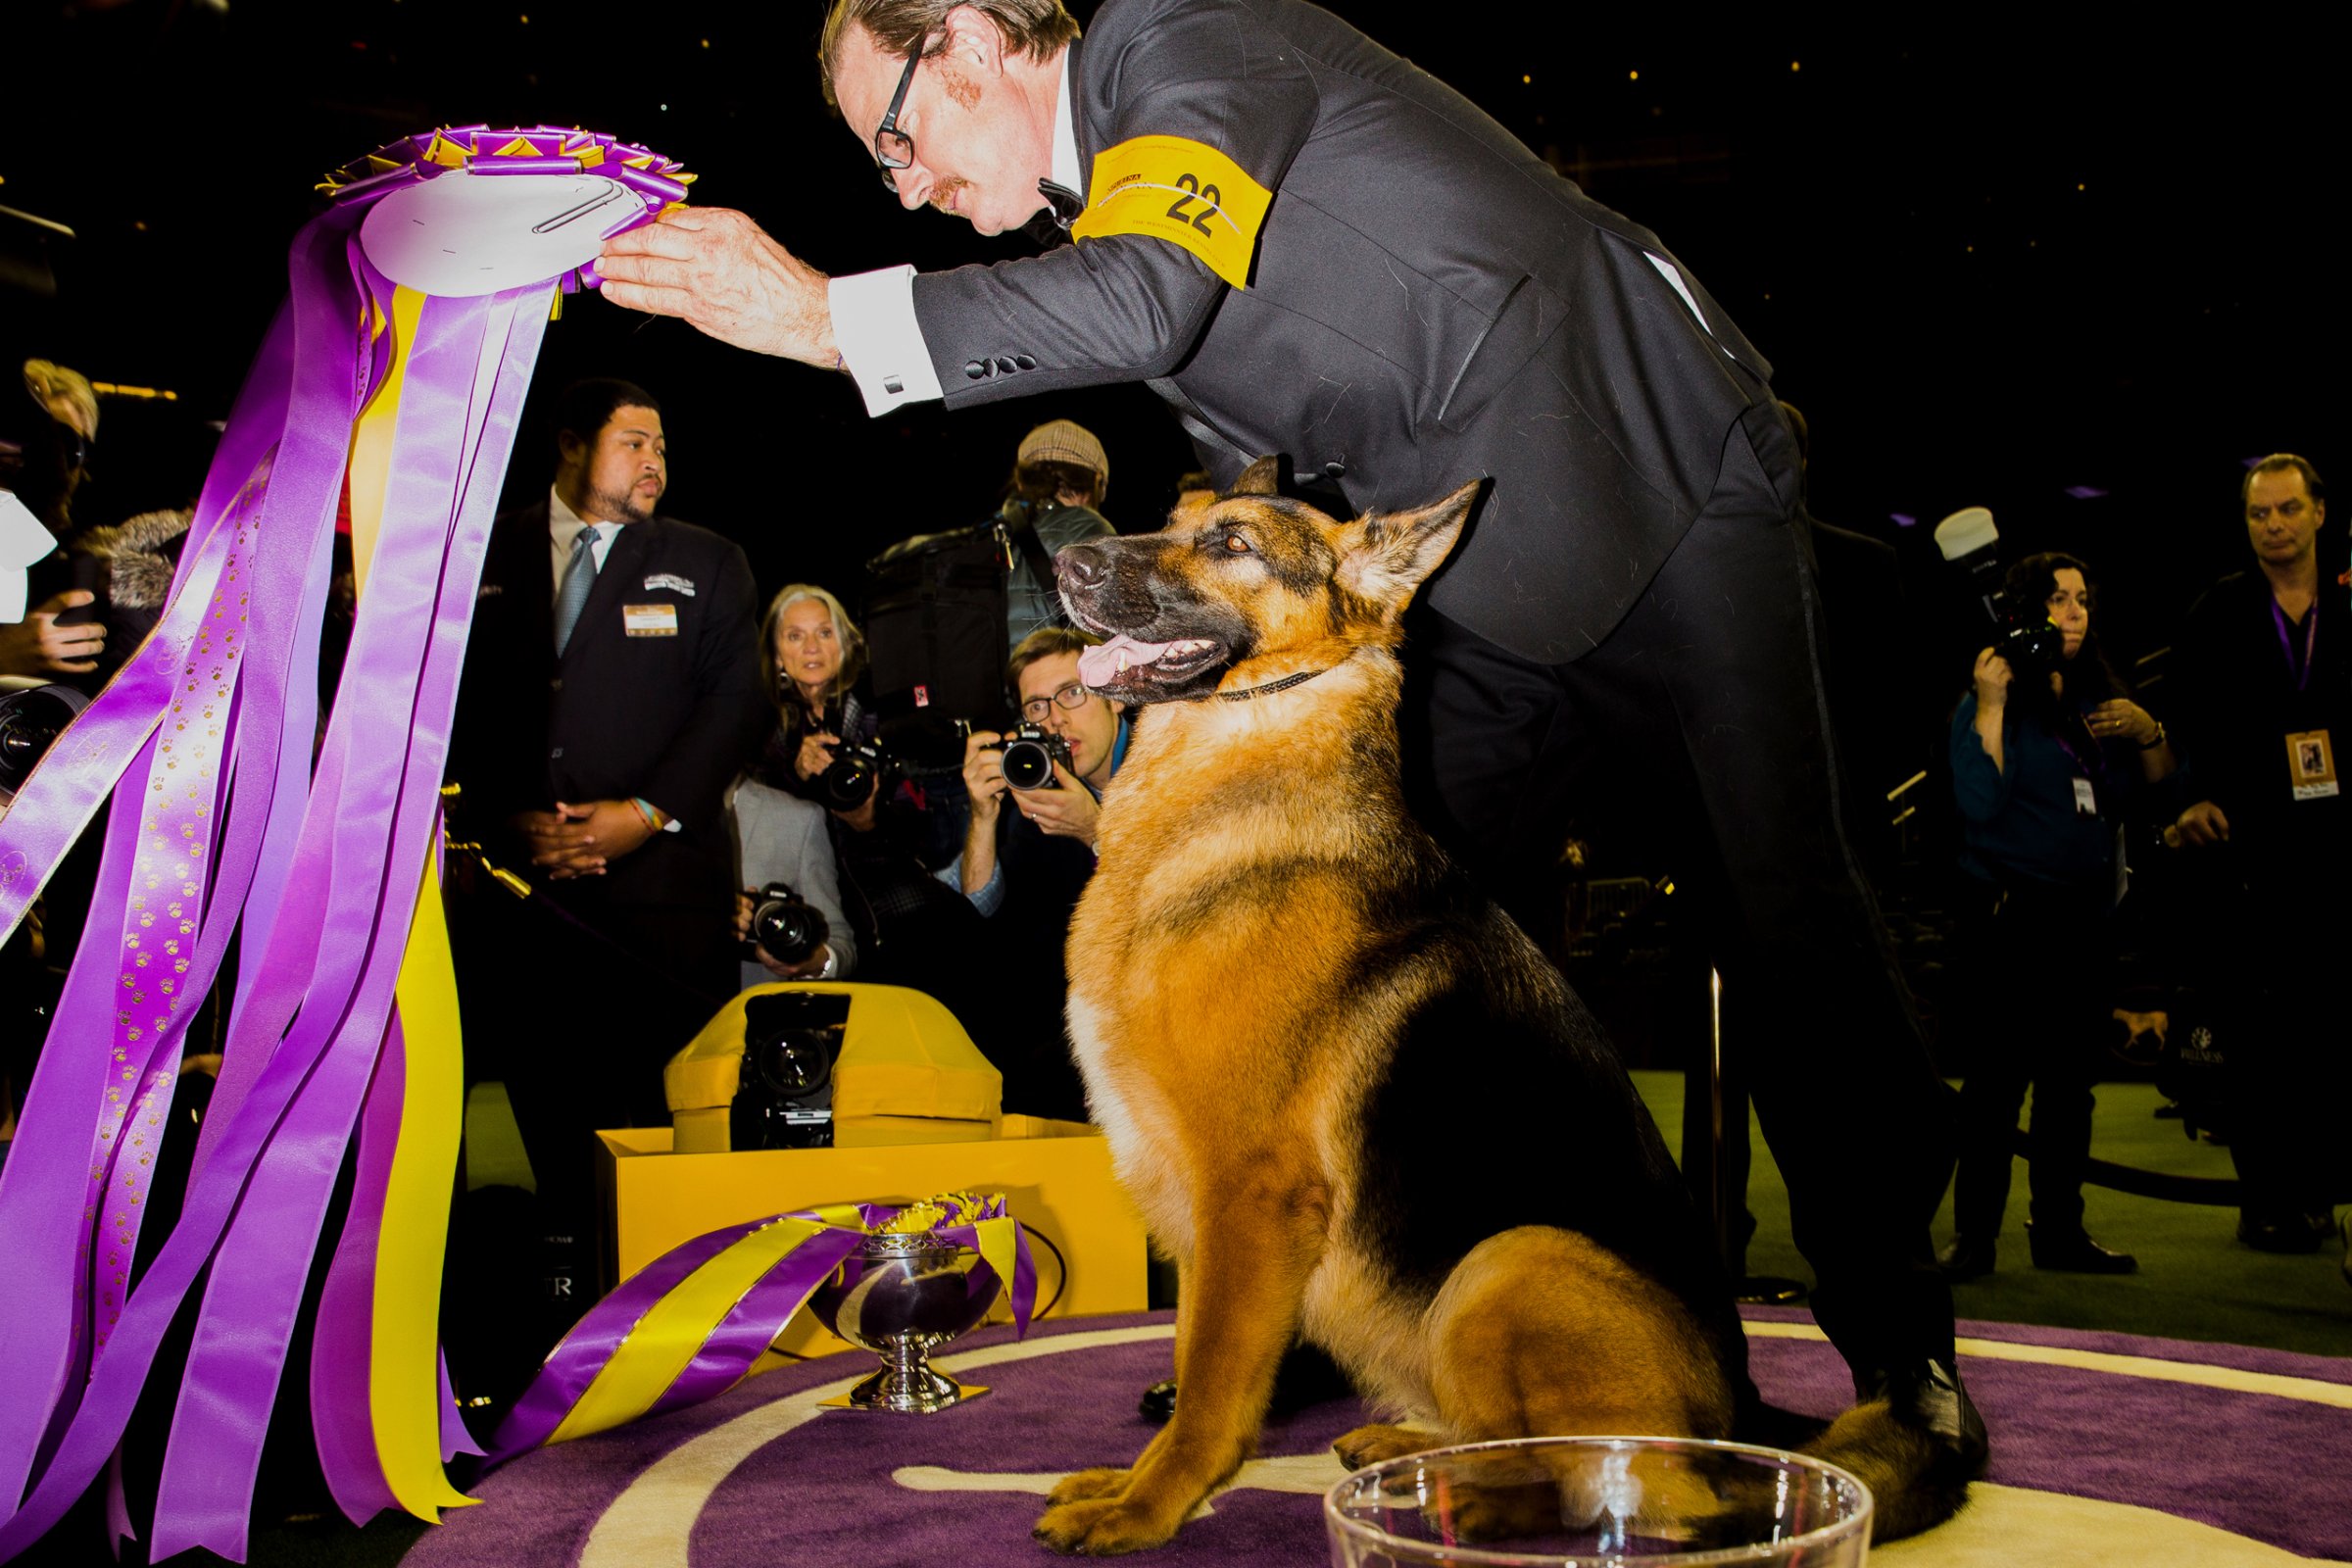 Rumor, a German shepherd, stands next to his handler in the winner's circle after taking the "Best In Show" award at the 141st Westminster Kennel Club Dog Show in New York on Feb. 14, 2017.